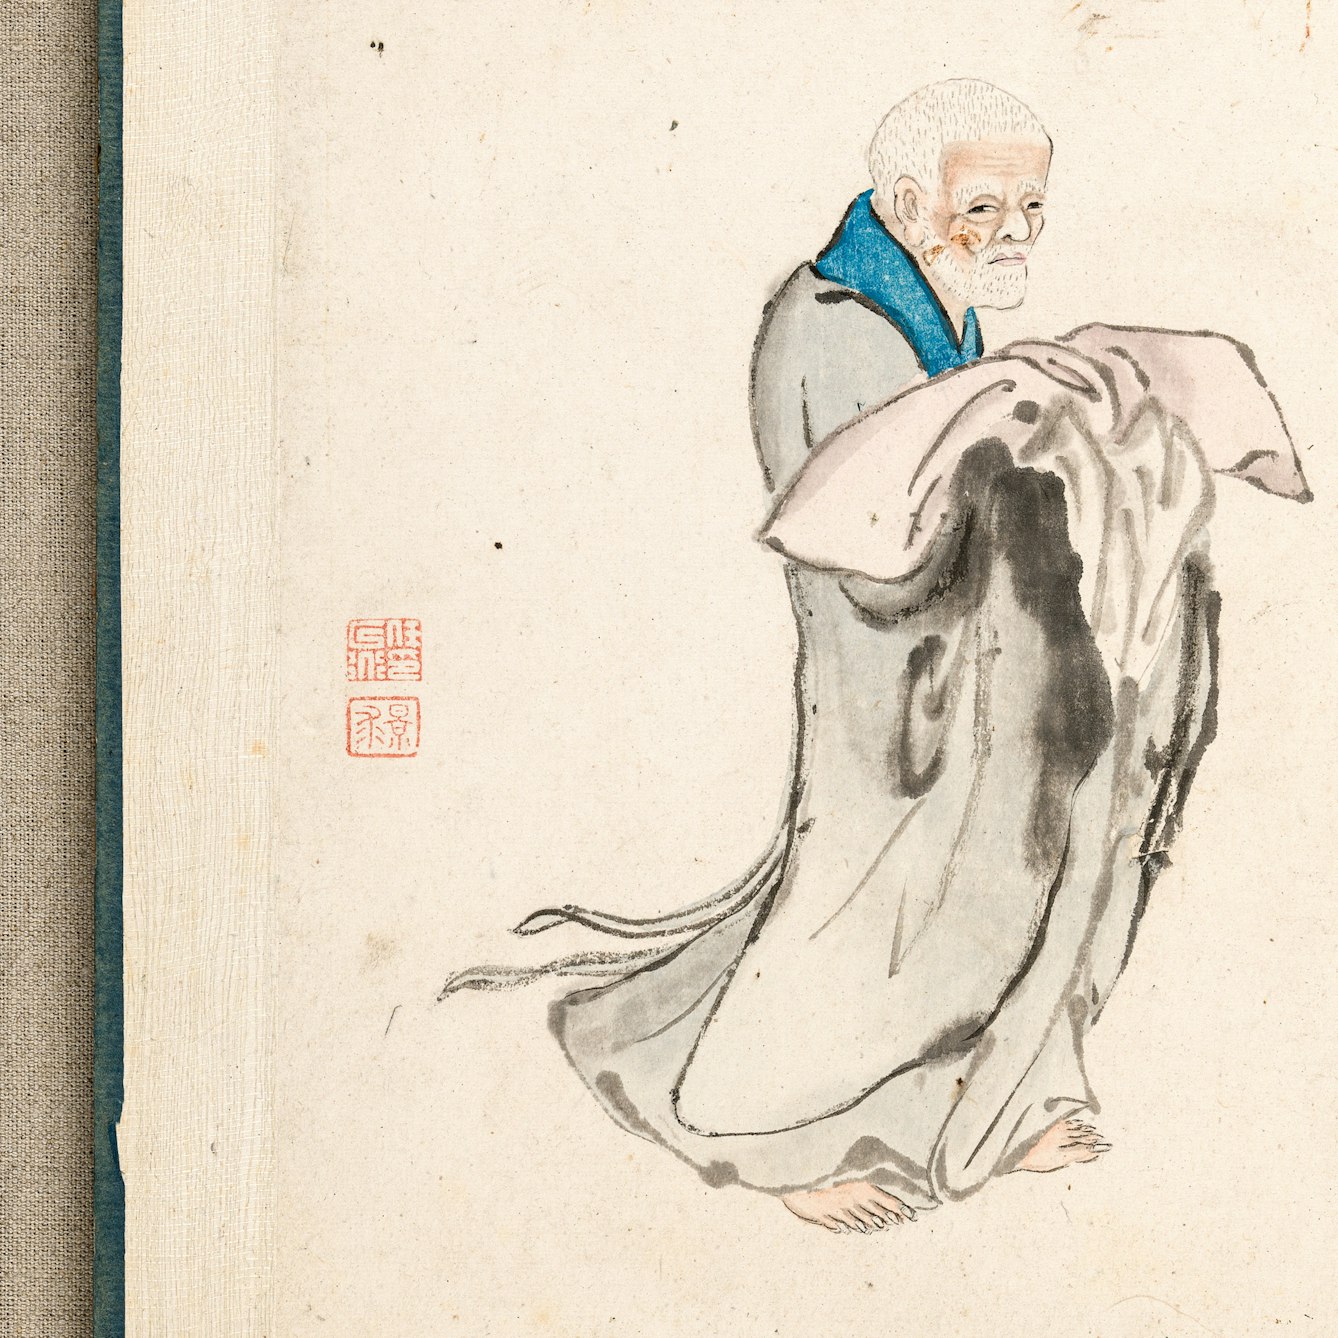 Painting of a Chinese man in grey robes holding a soft pillow.